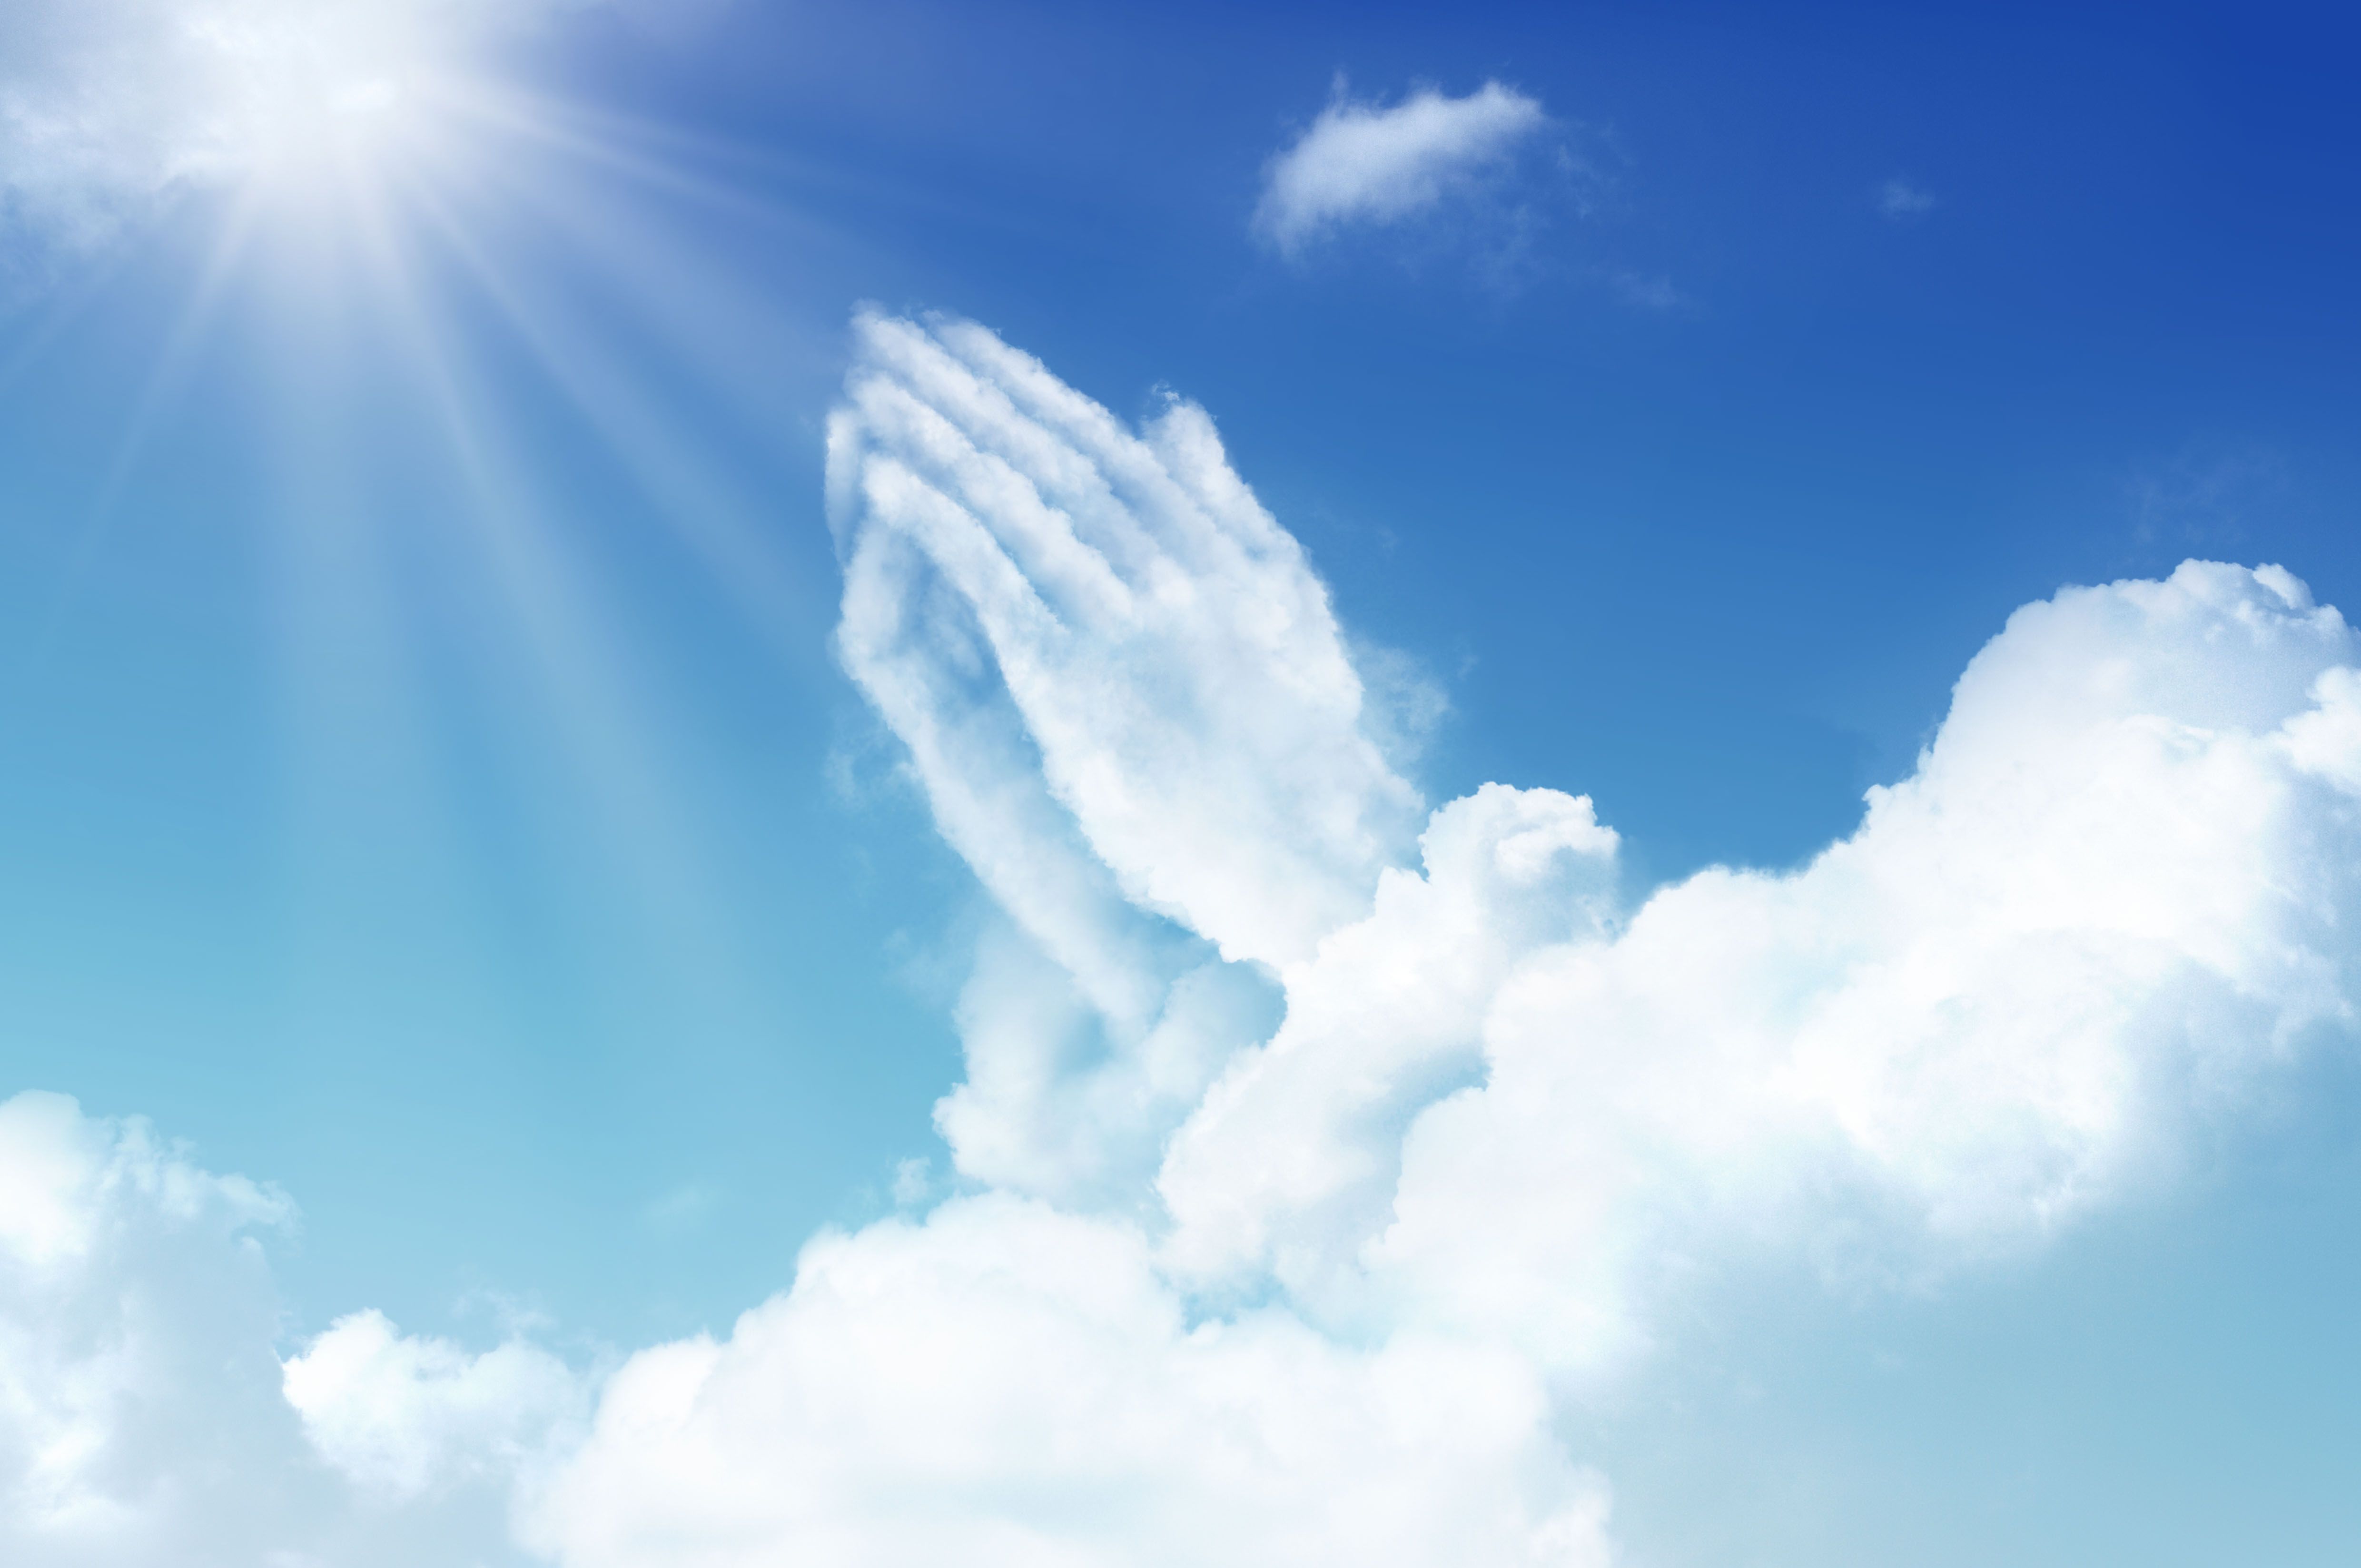 Heaven Clouds Background